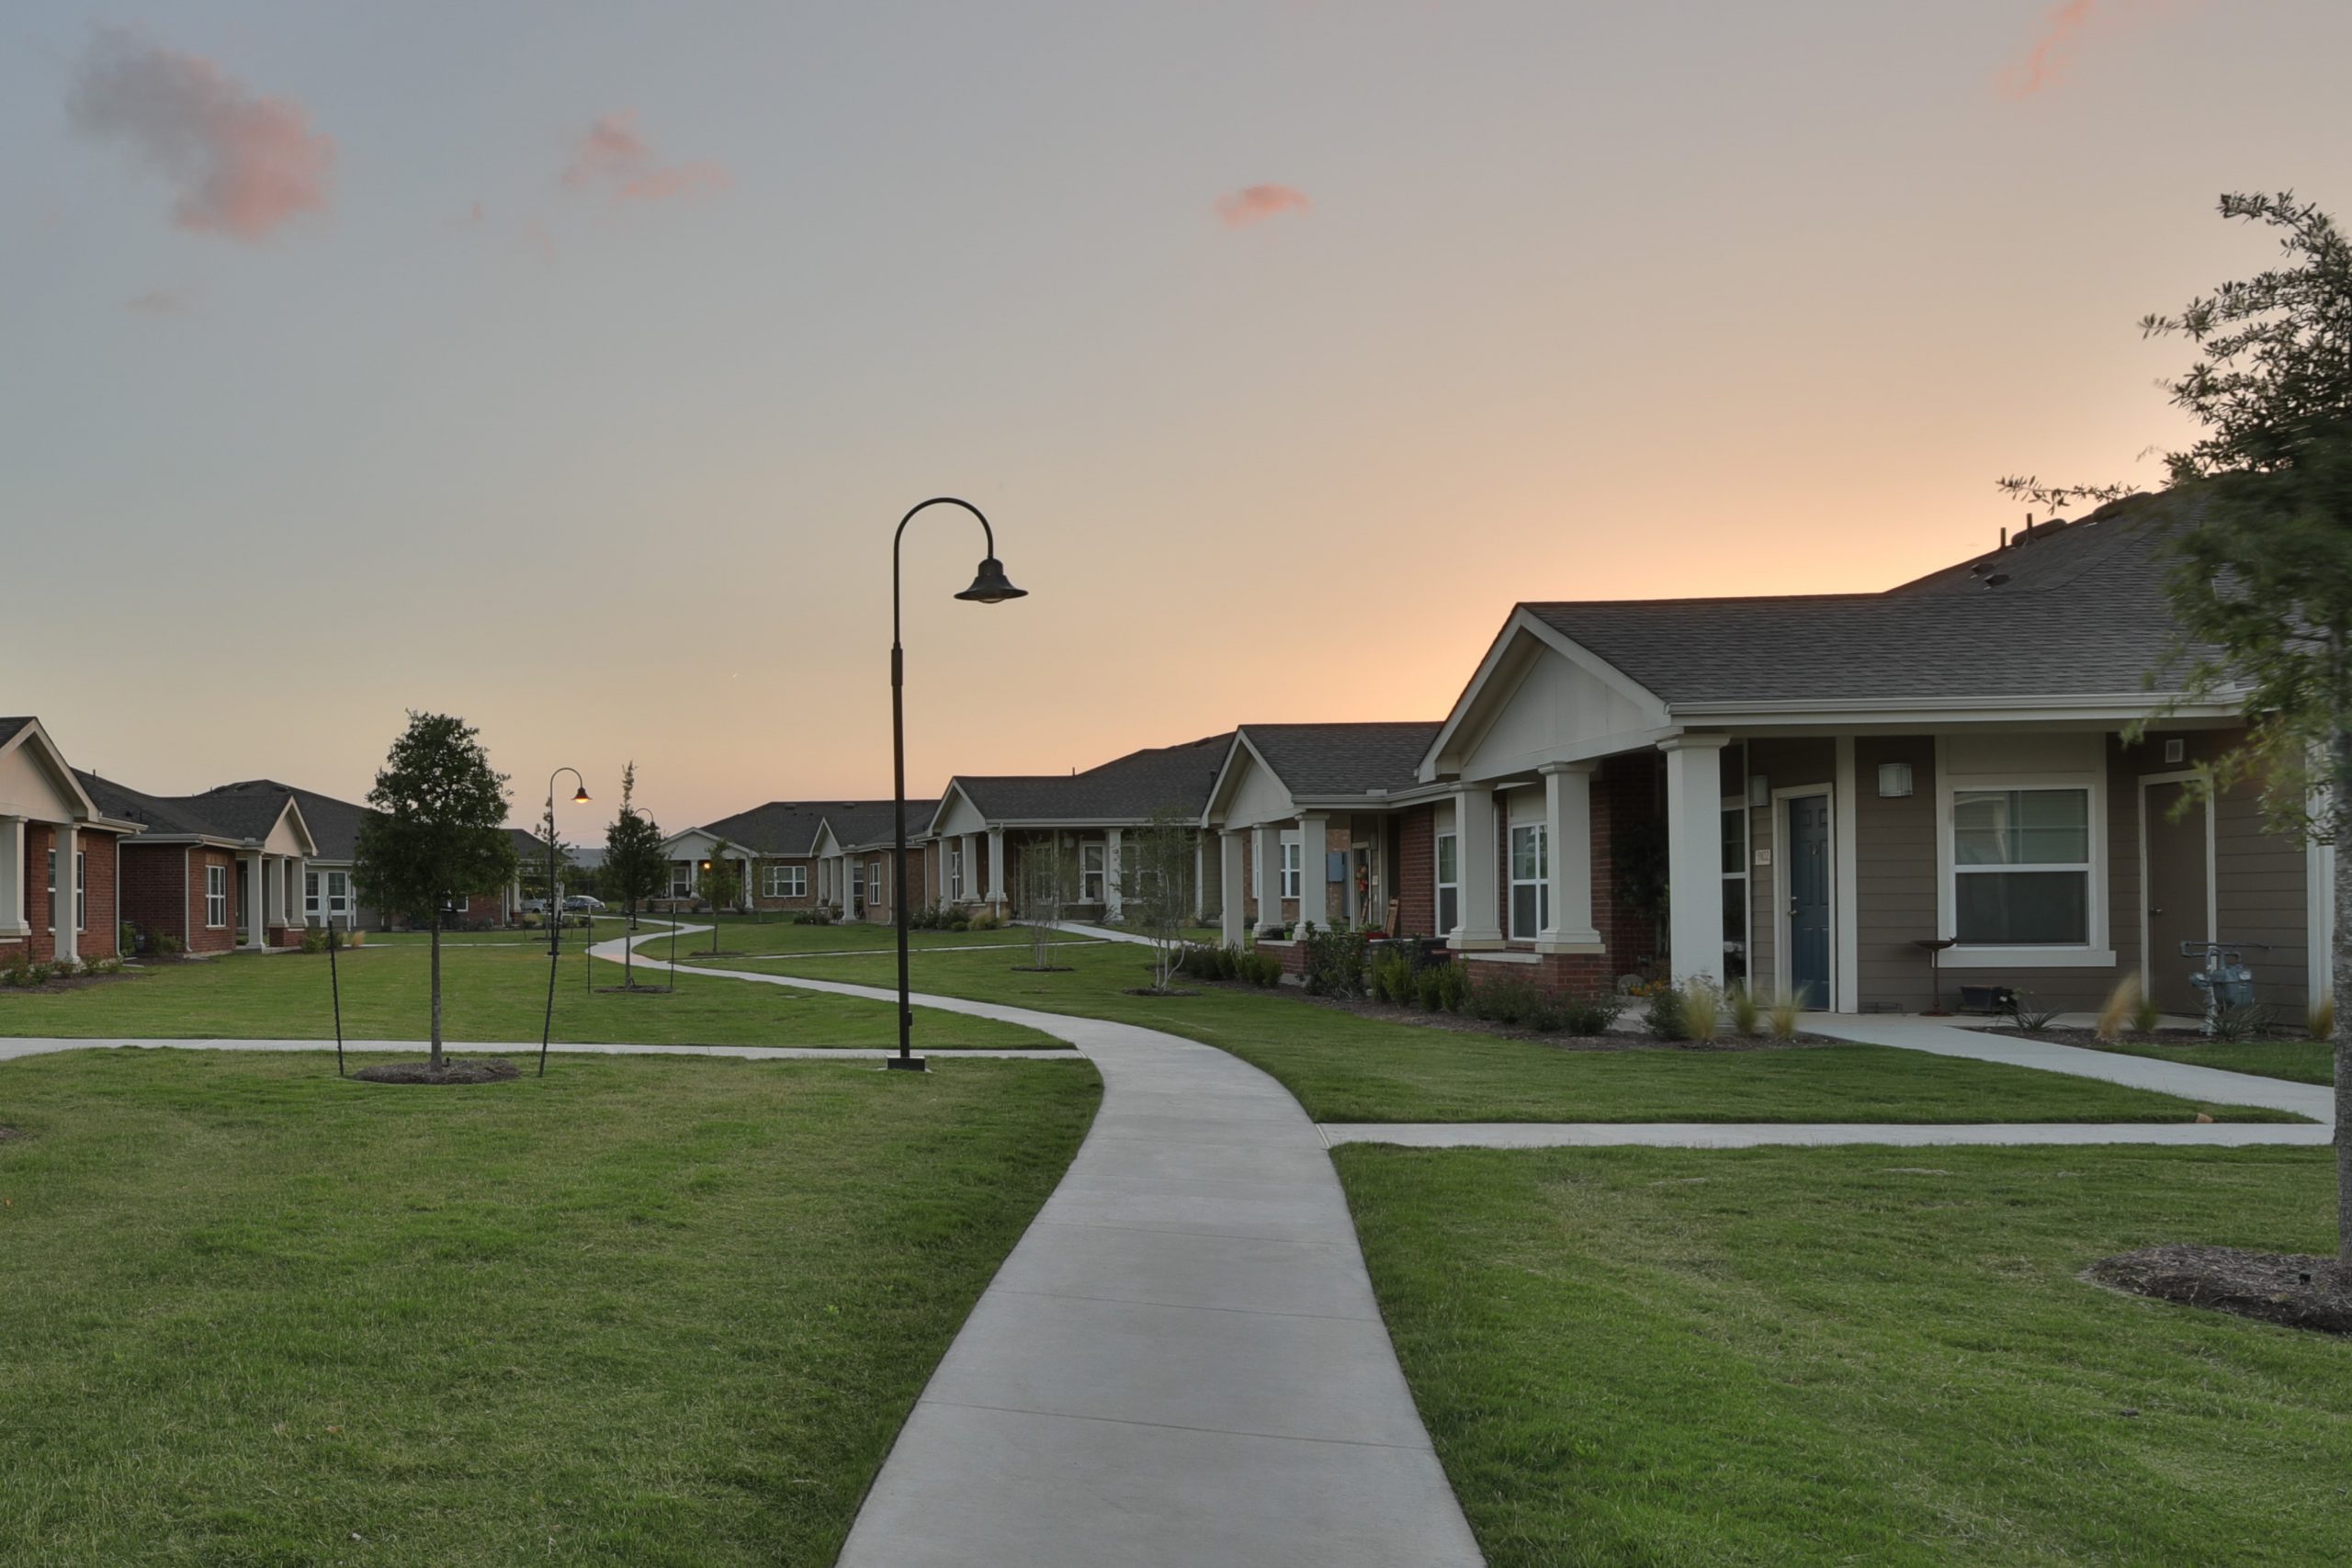 Sidewalk going through housing community with grassy lawns and a sunset sky